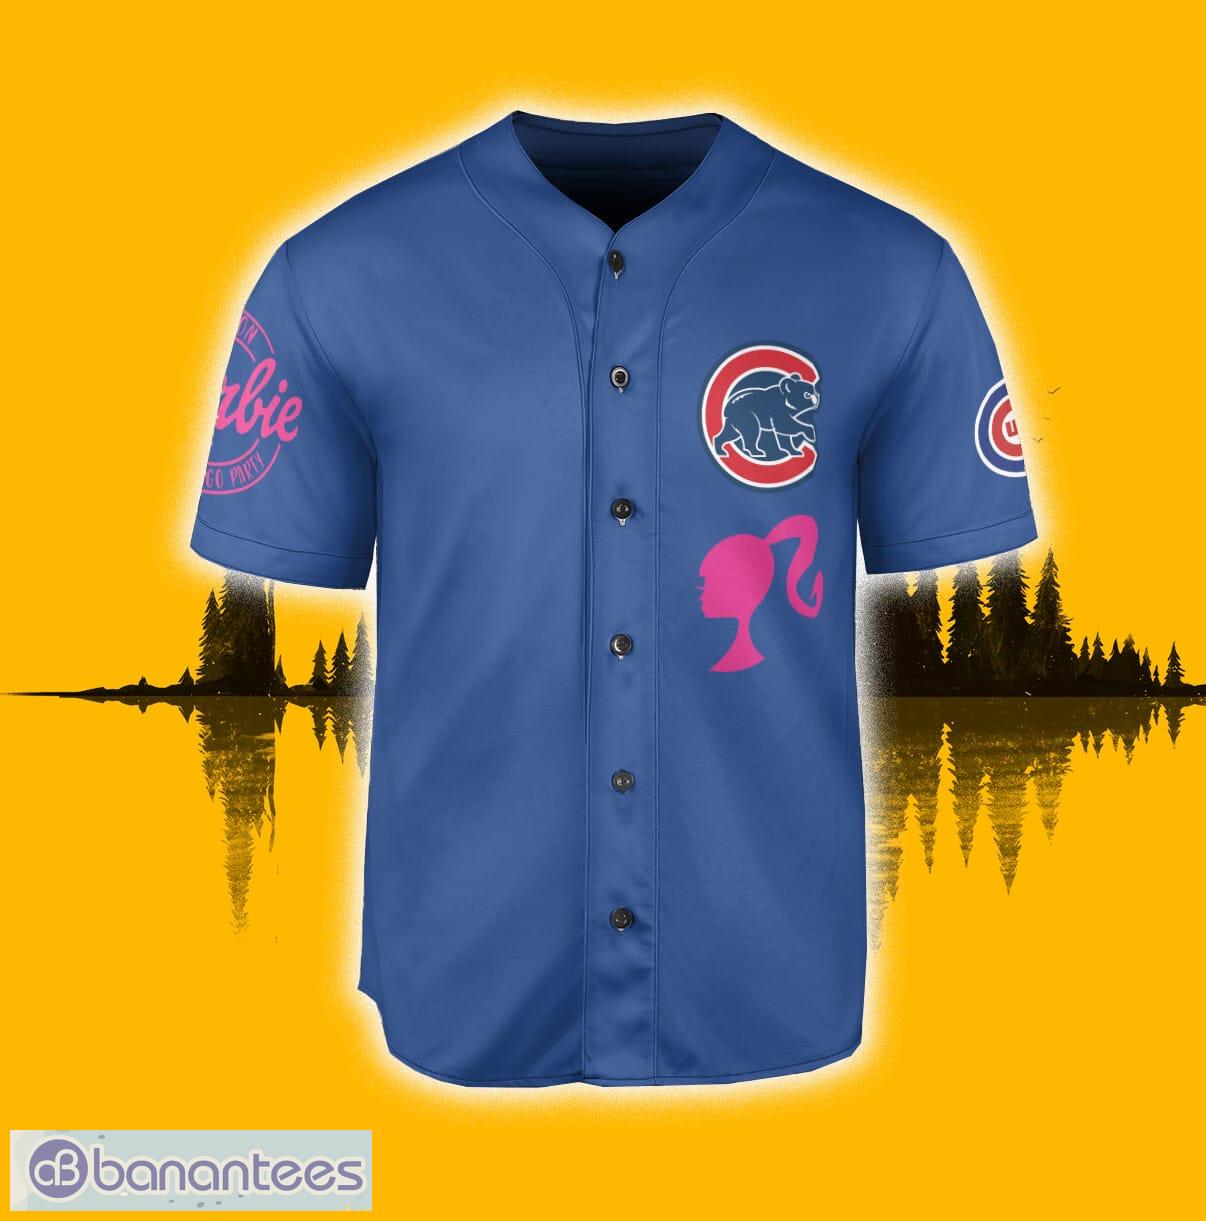 Chicago Cubs Barbie Jersey Baseball Shirt Royal Custom Number And